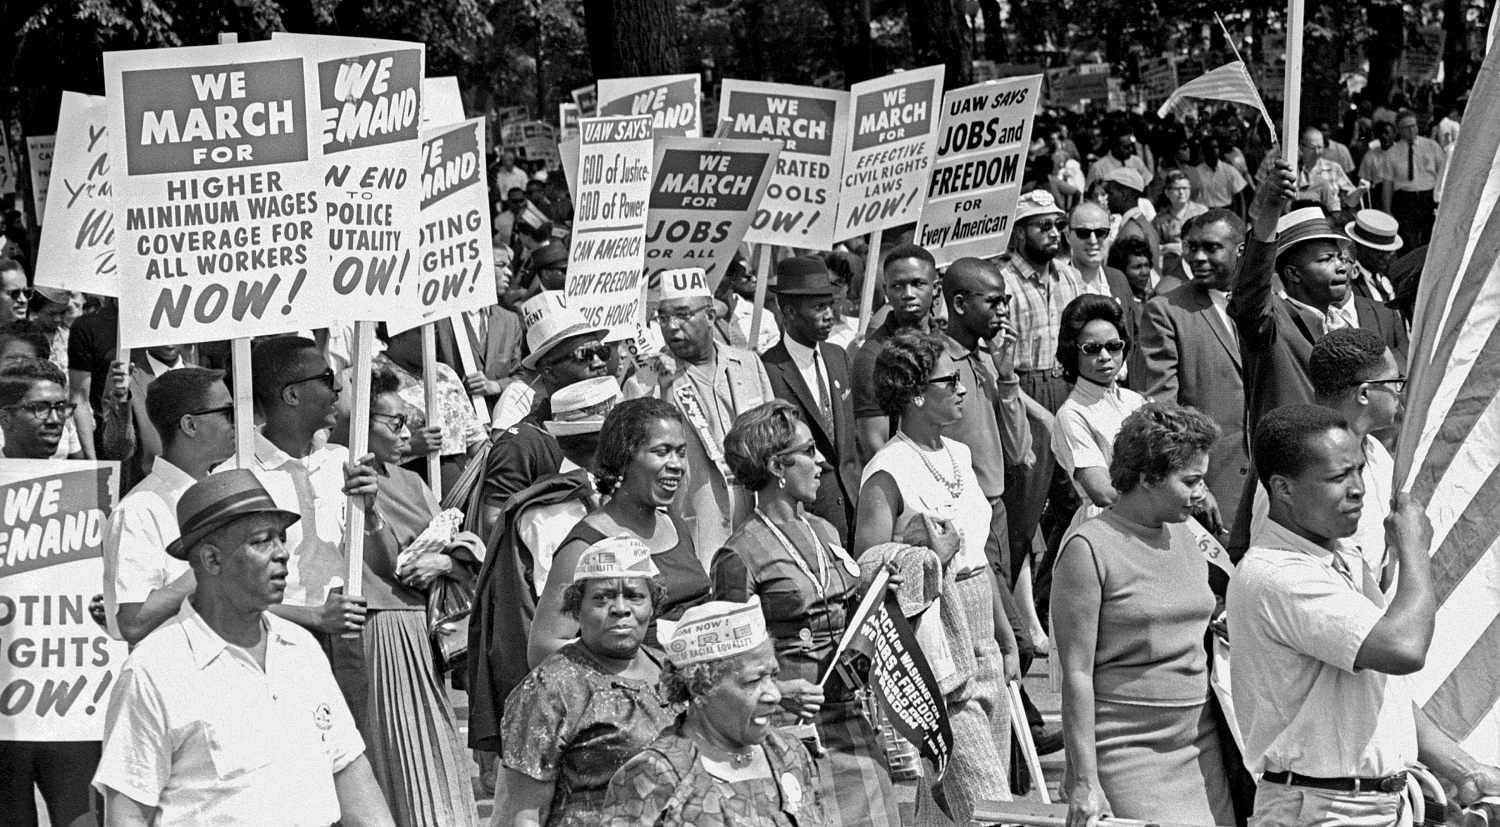 In this historic black and white photo, a crowd of African American civil rights protesters is gathered. Many hold signs that say 